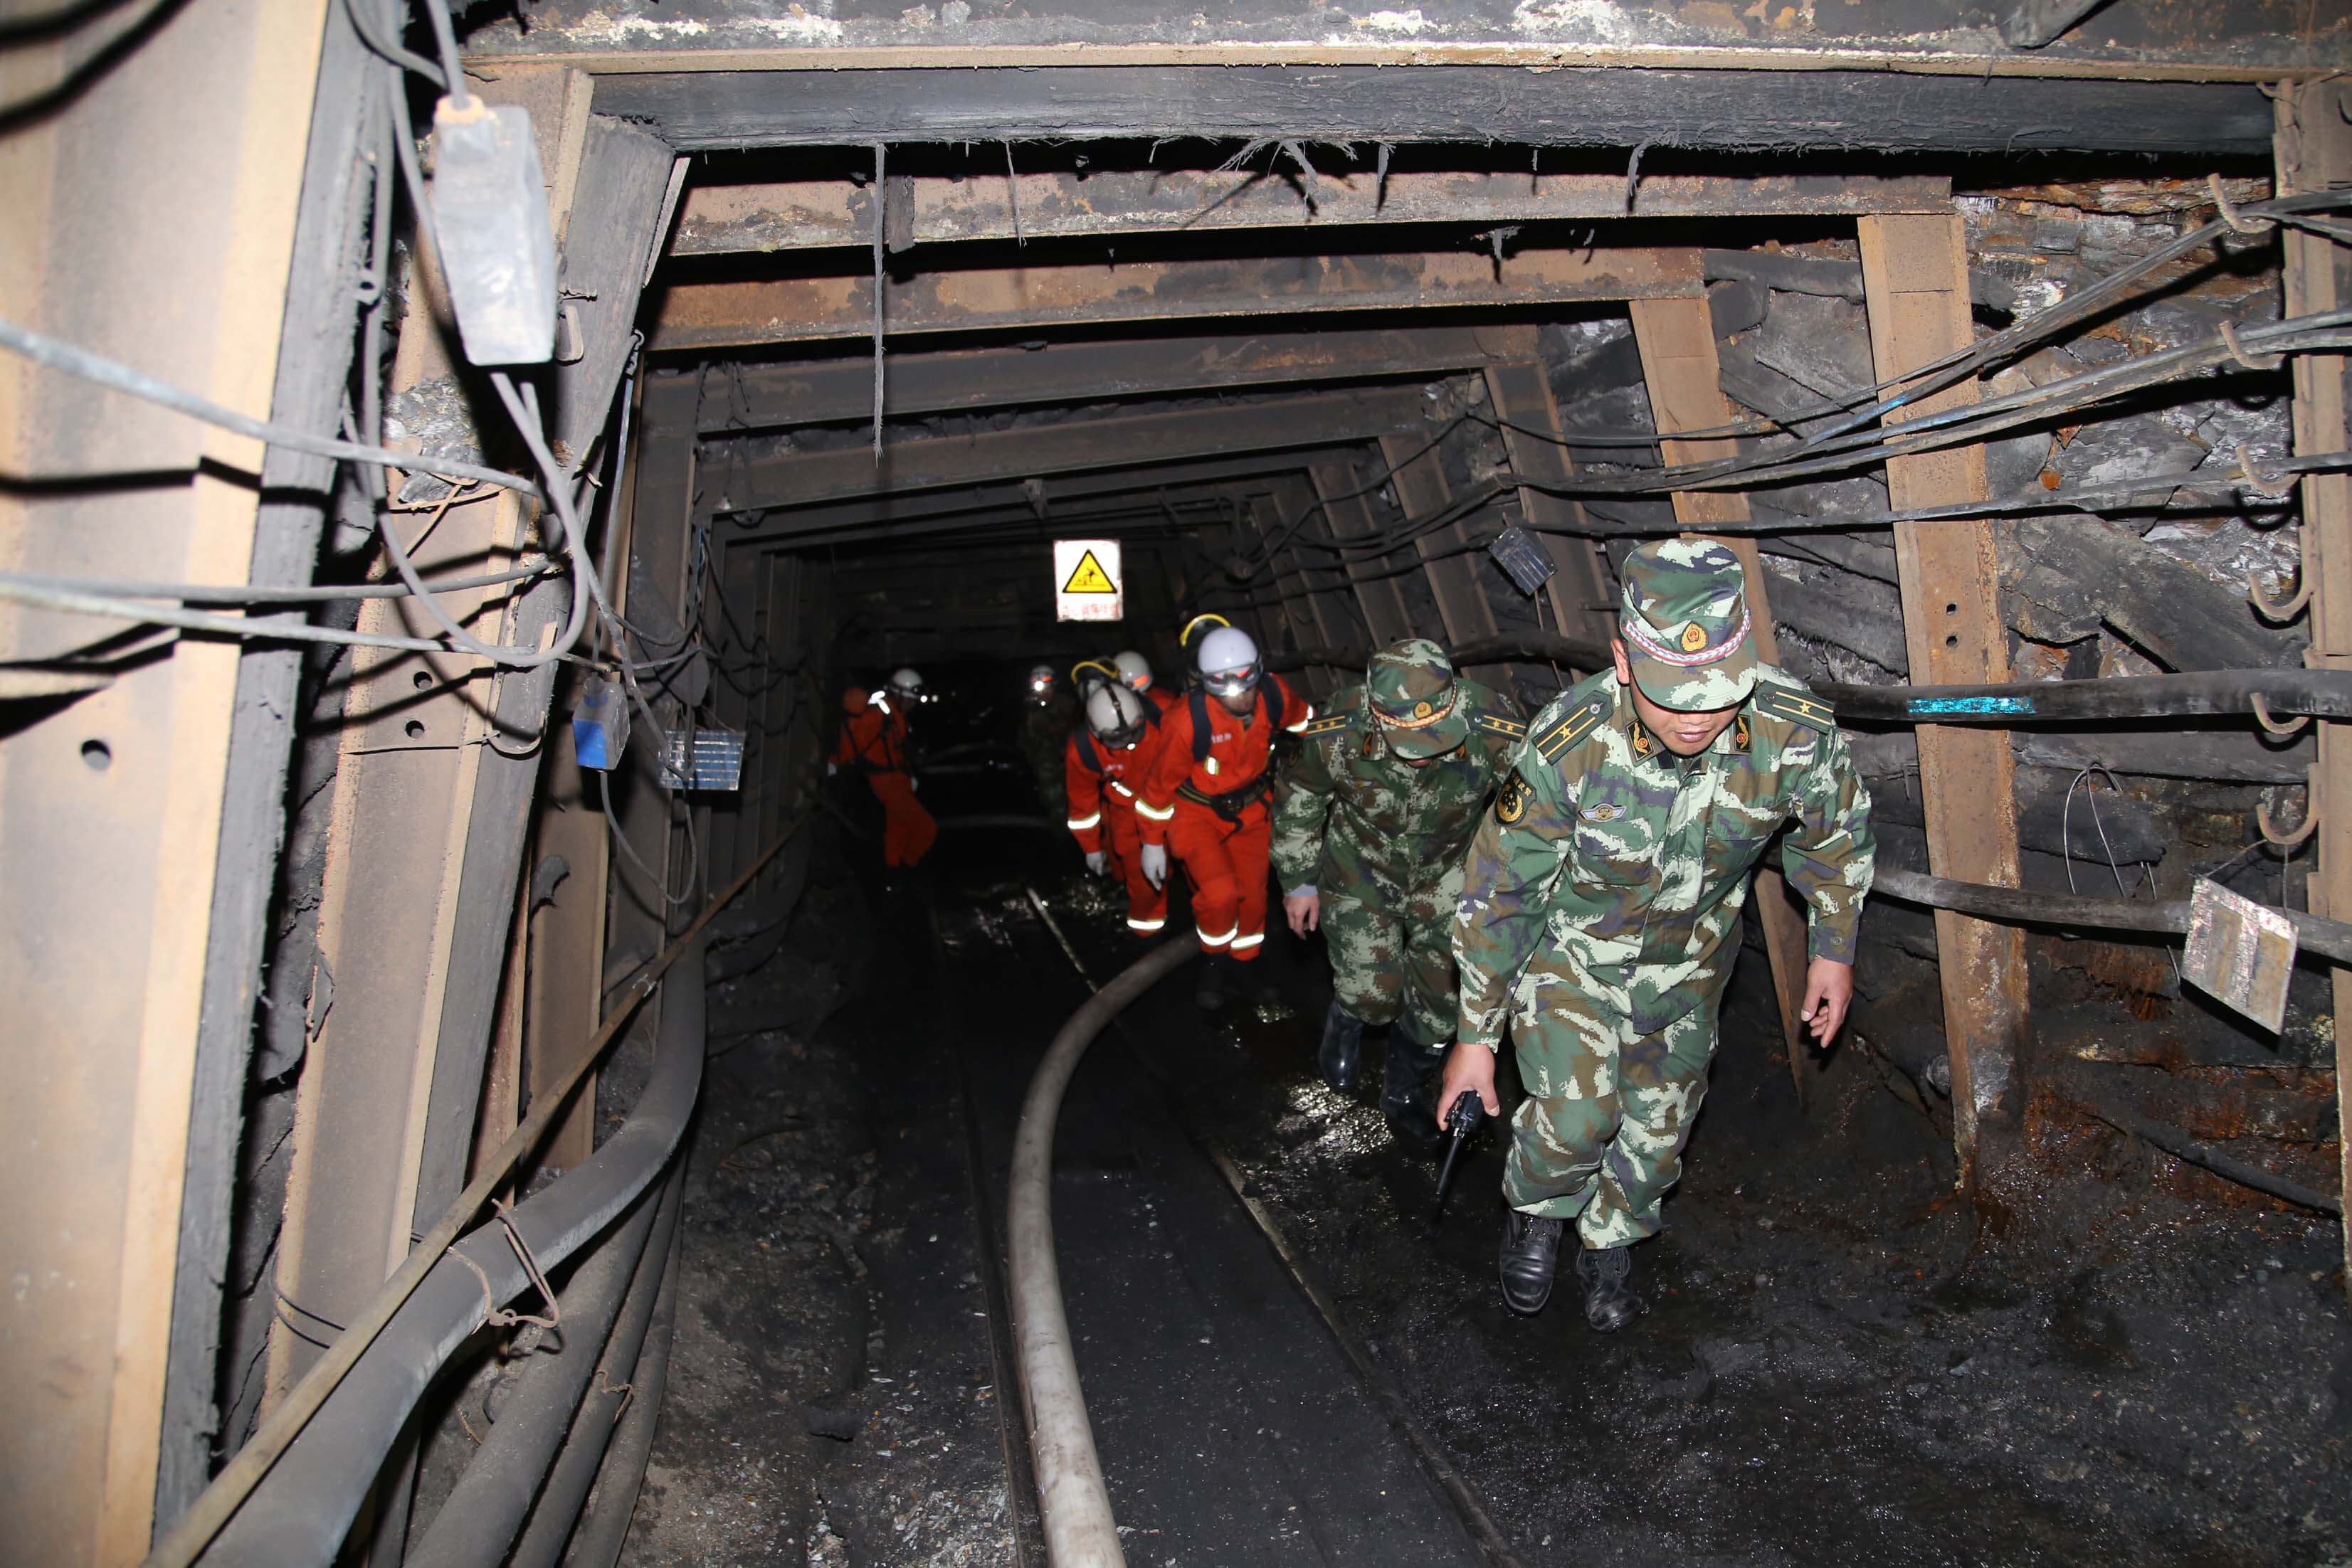 QUJING, CHINA - APRIL 07: (CHINA OUT) Rescuers race against time to pump water from a flooded coal mine where 22 miners were trapped underground on April 7, 2014 in Qujing, Yunnan Province of China. A mining zone of the Xiahaizi Coal Mine was flooded while 26 miners were working at 4:50 am. Only four miners managed to escape, 22 coal miners were trapped underground. (Photo by ChinaFotoPress/ChinaFotoPress via Getty Images)